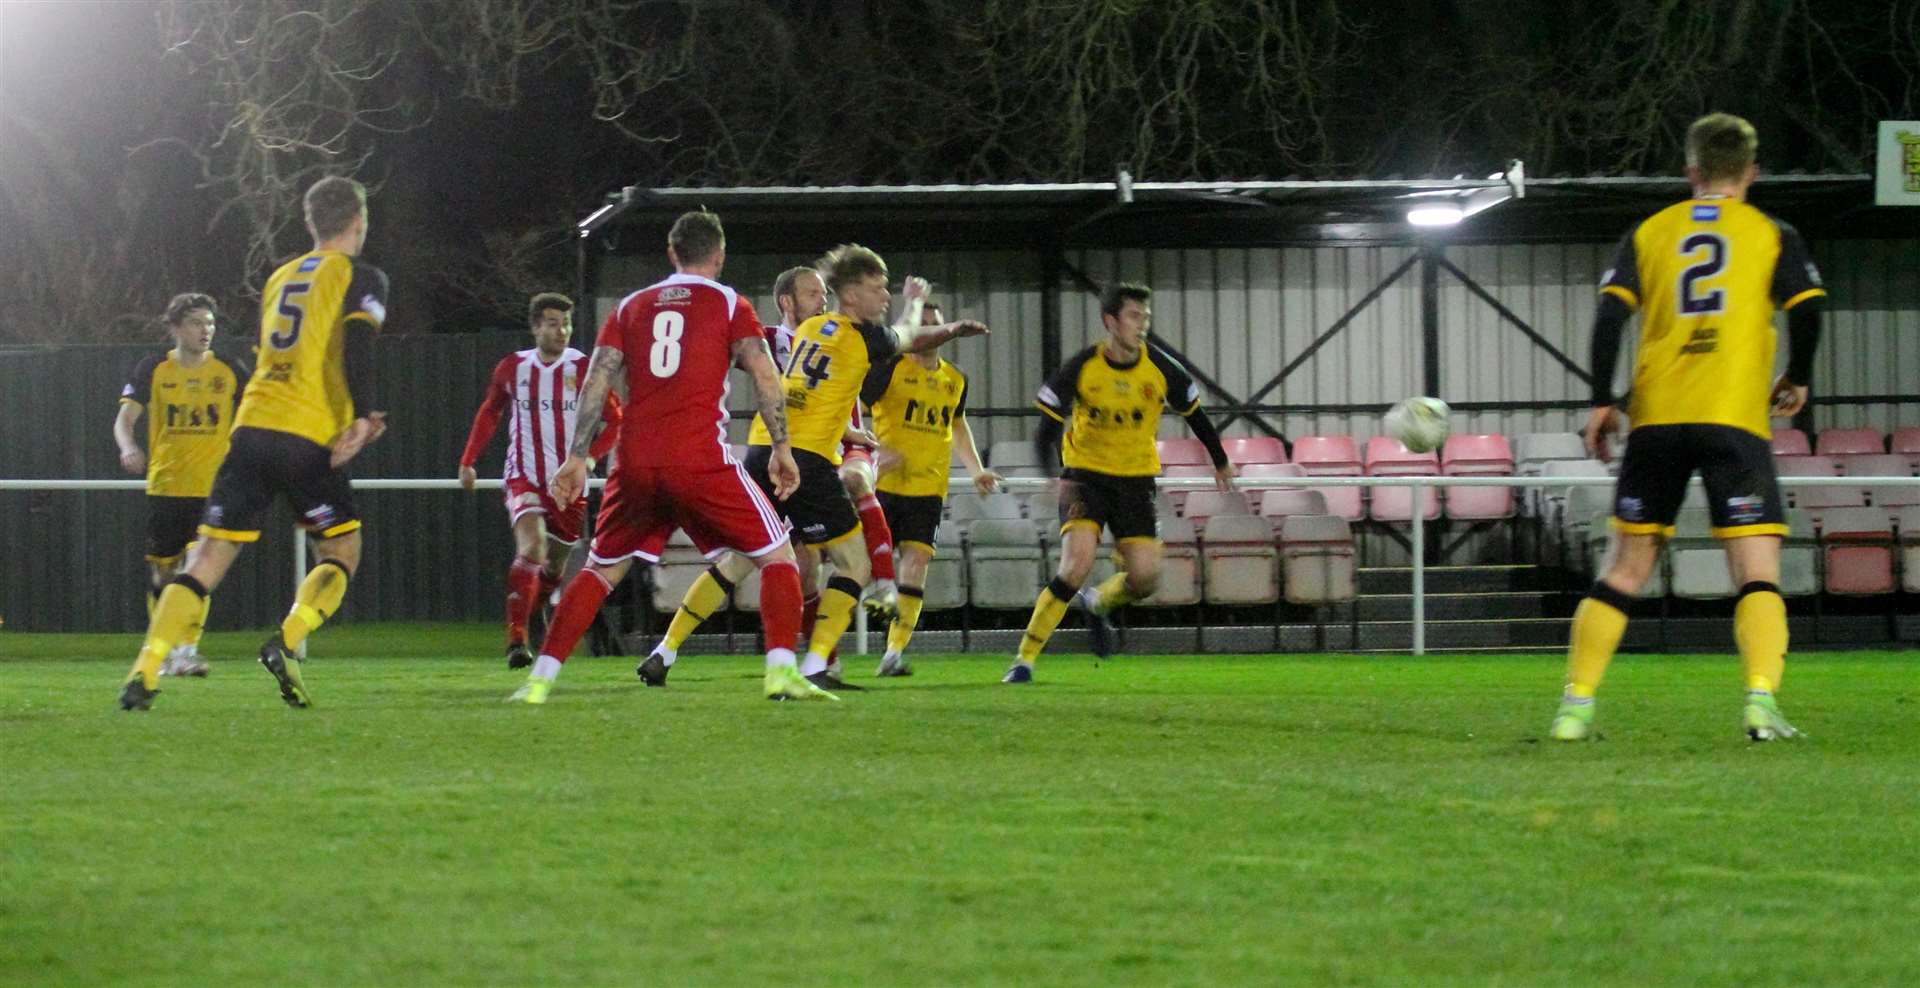 Formartine and Annan proved equally matched across the 120 minutes of play. Picture: Kyle Ritchie